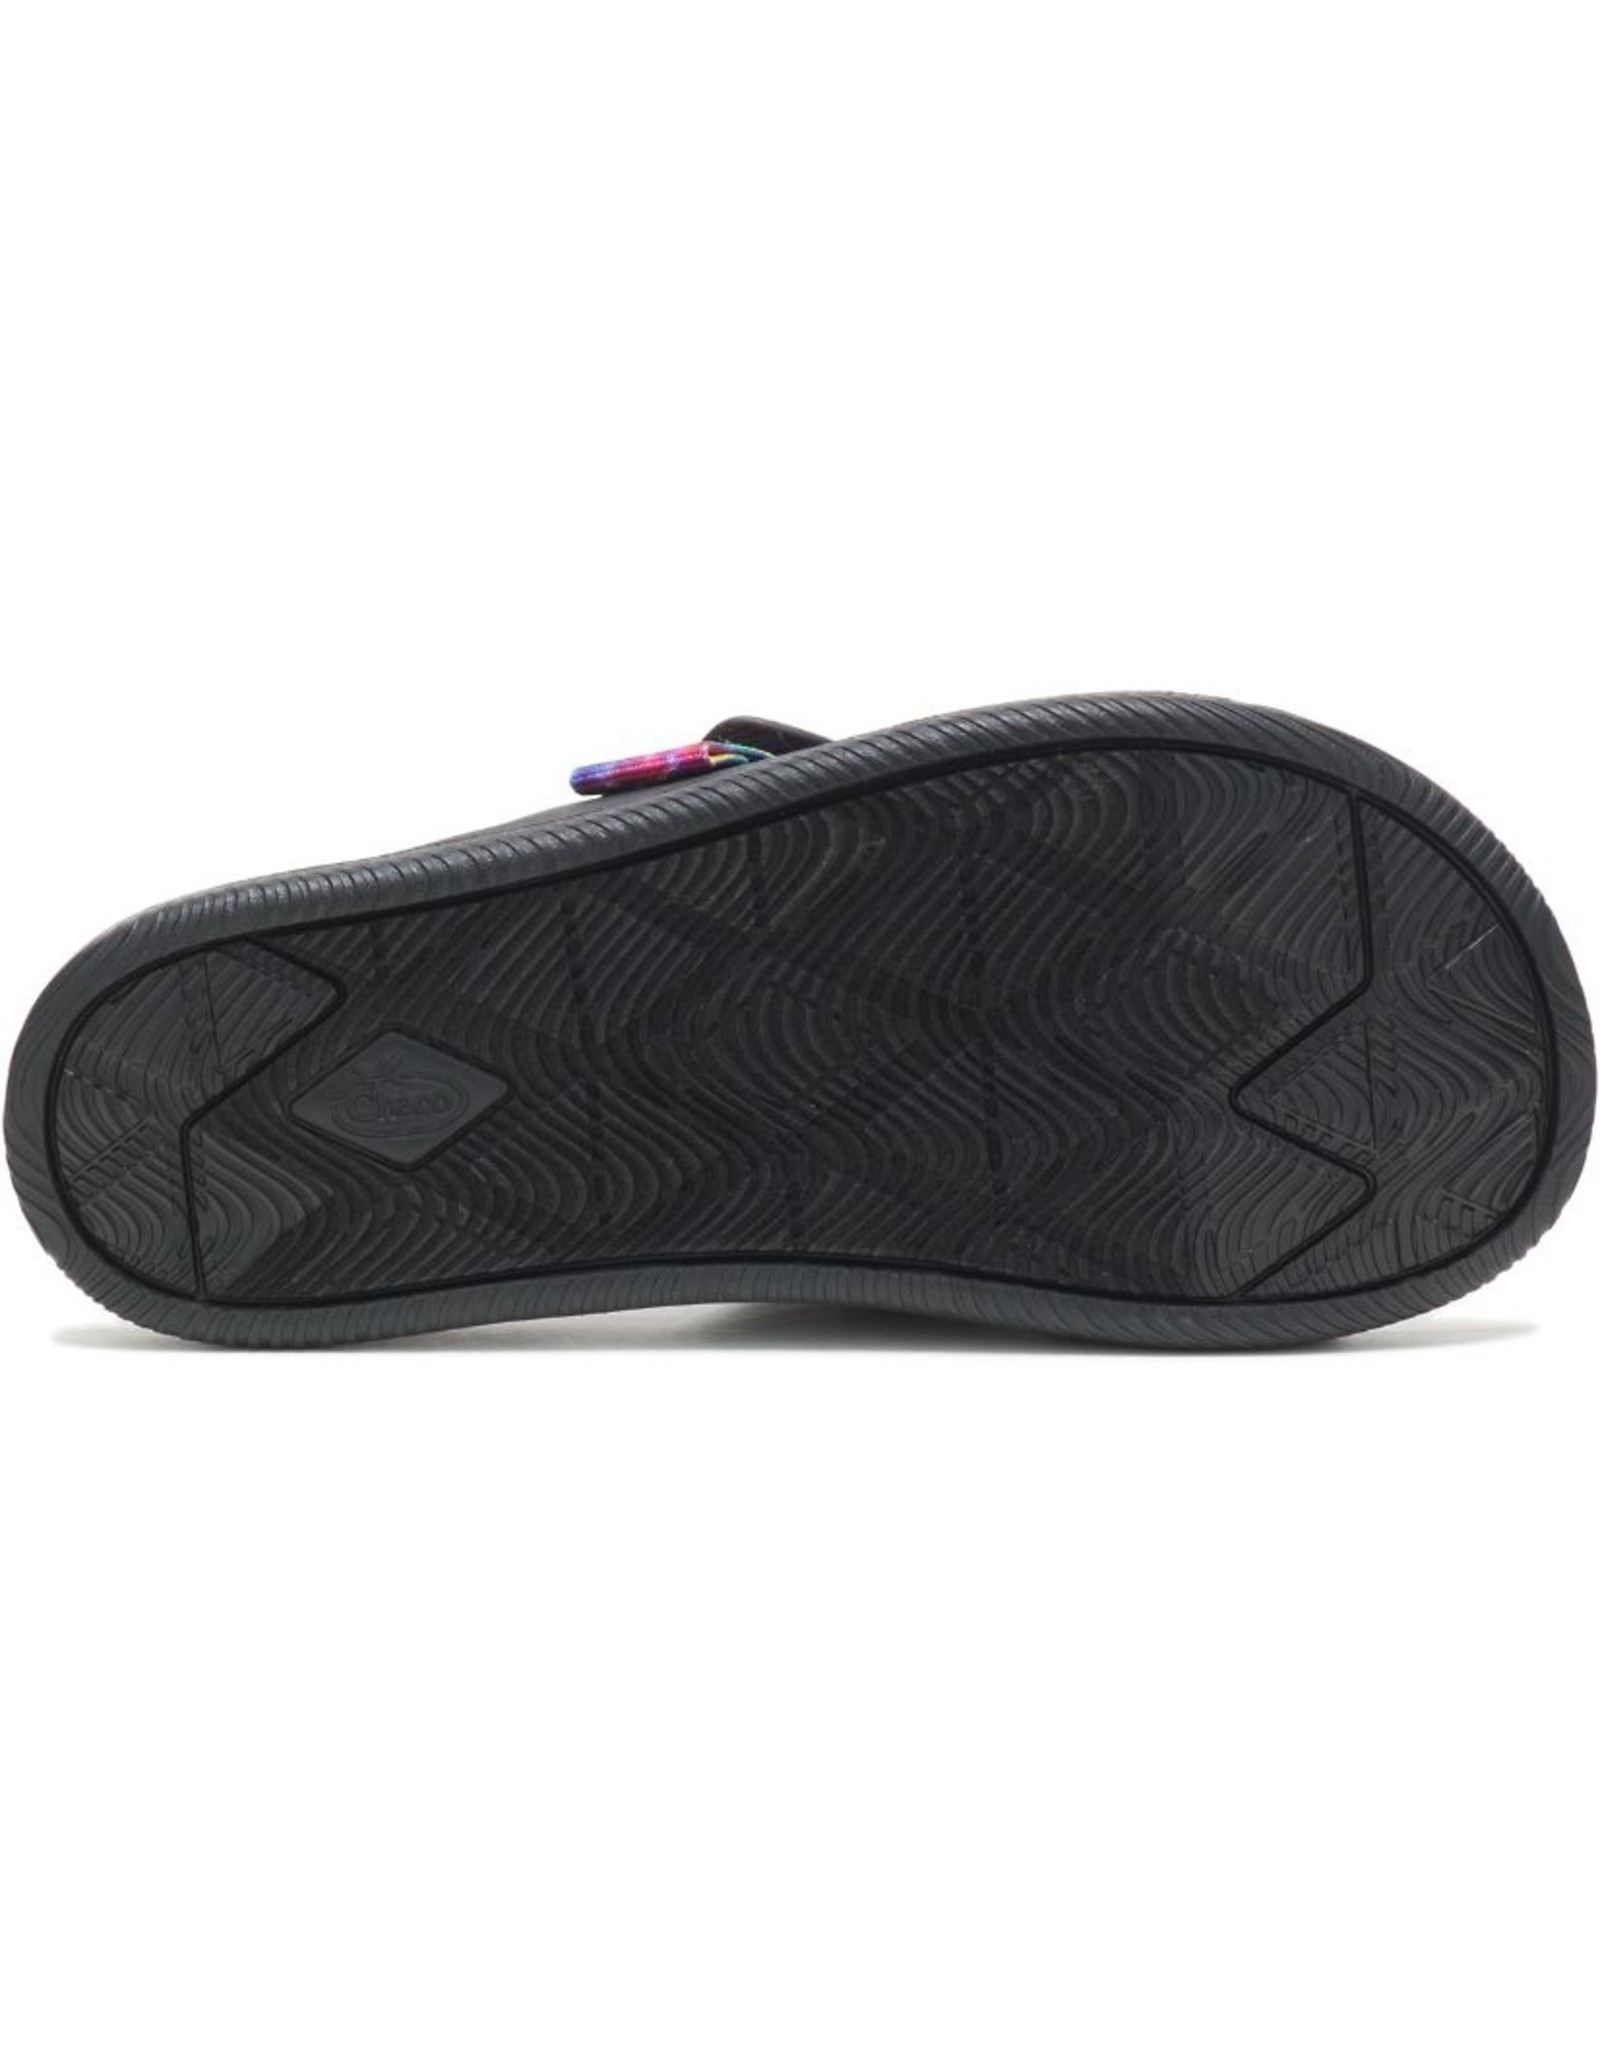 Chaco Chaco Women's Chillos Slide Sandals